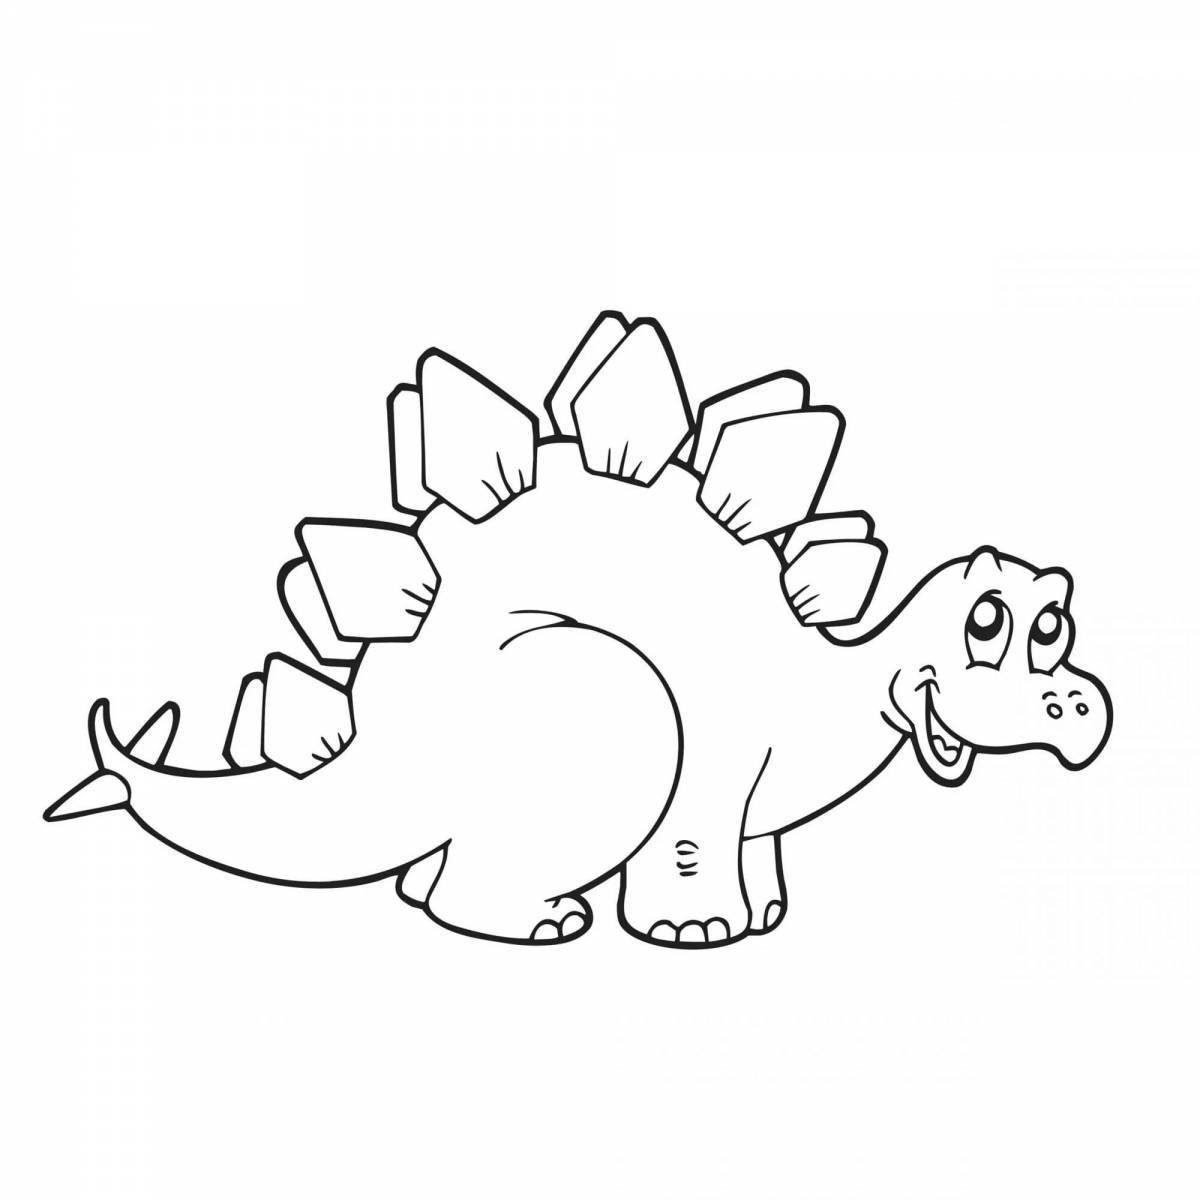 Amazing dinosaur coloring pages for 7-8 year olds